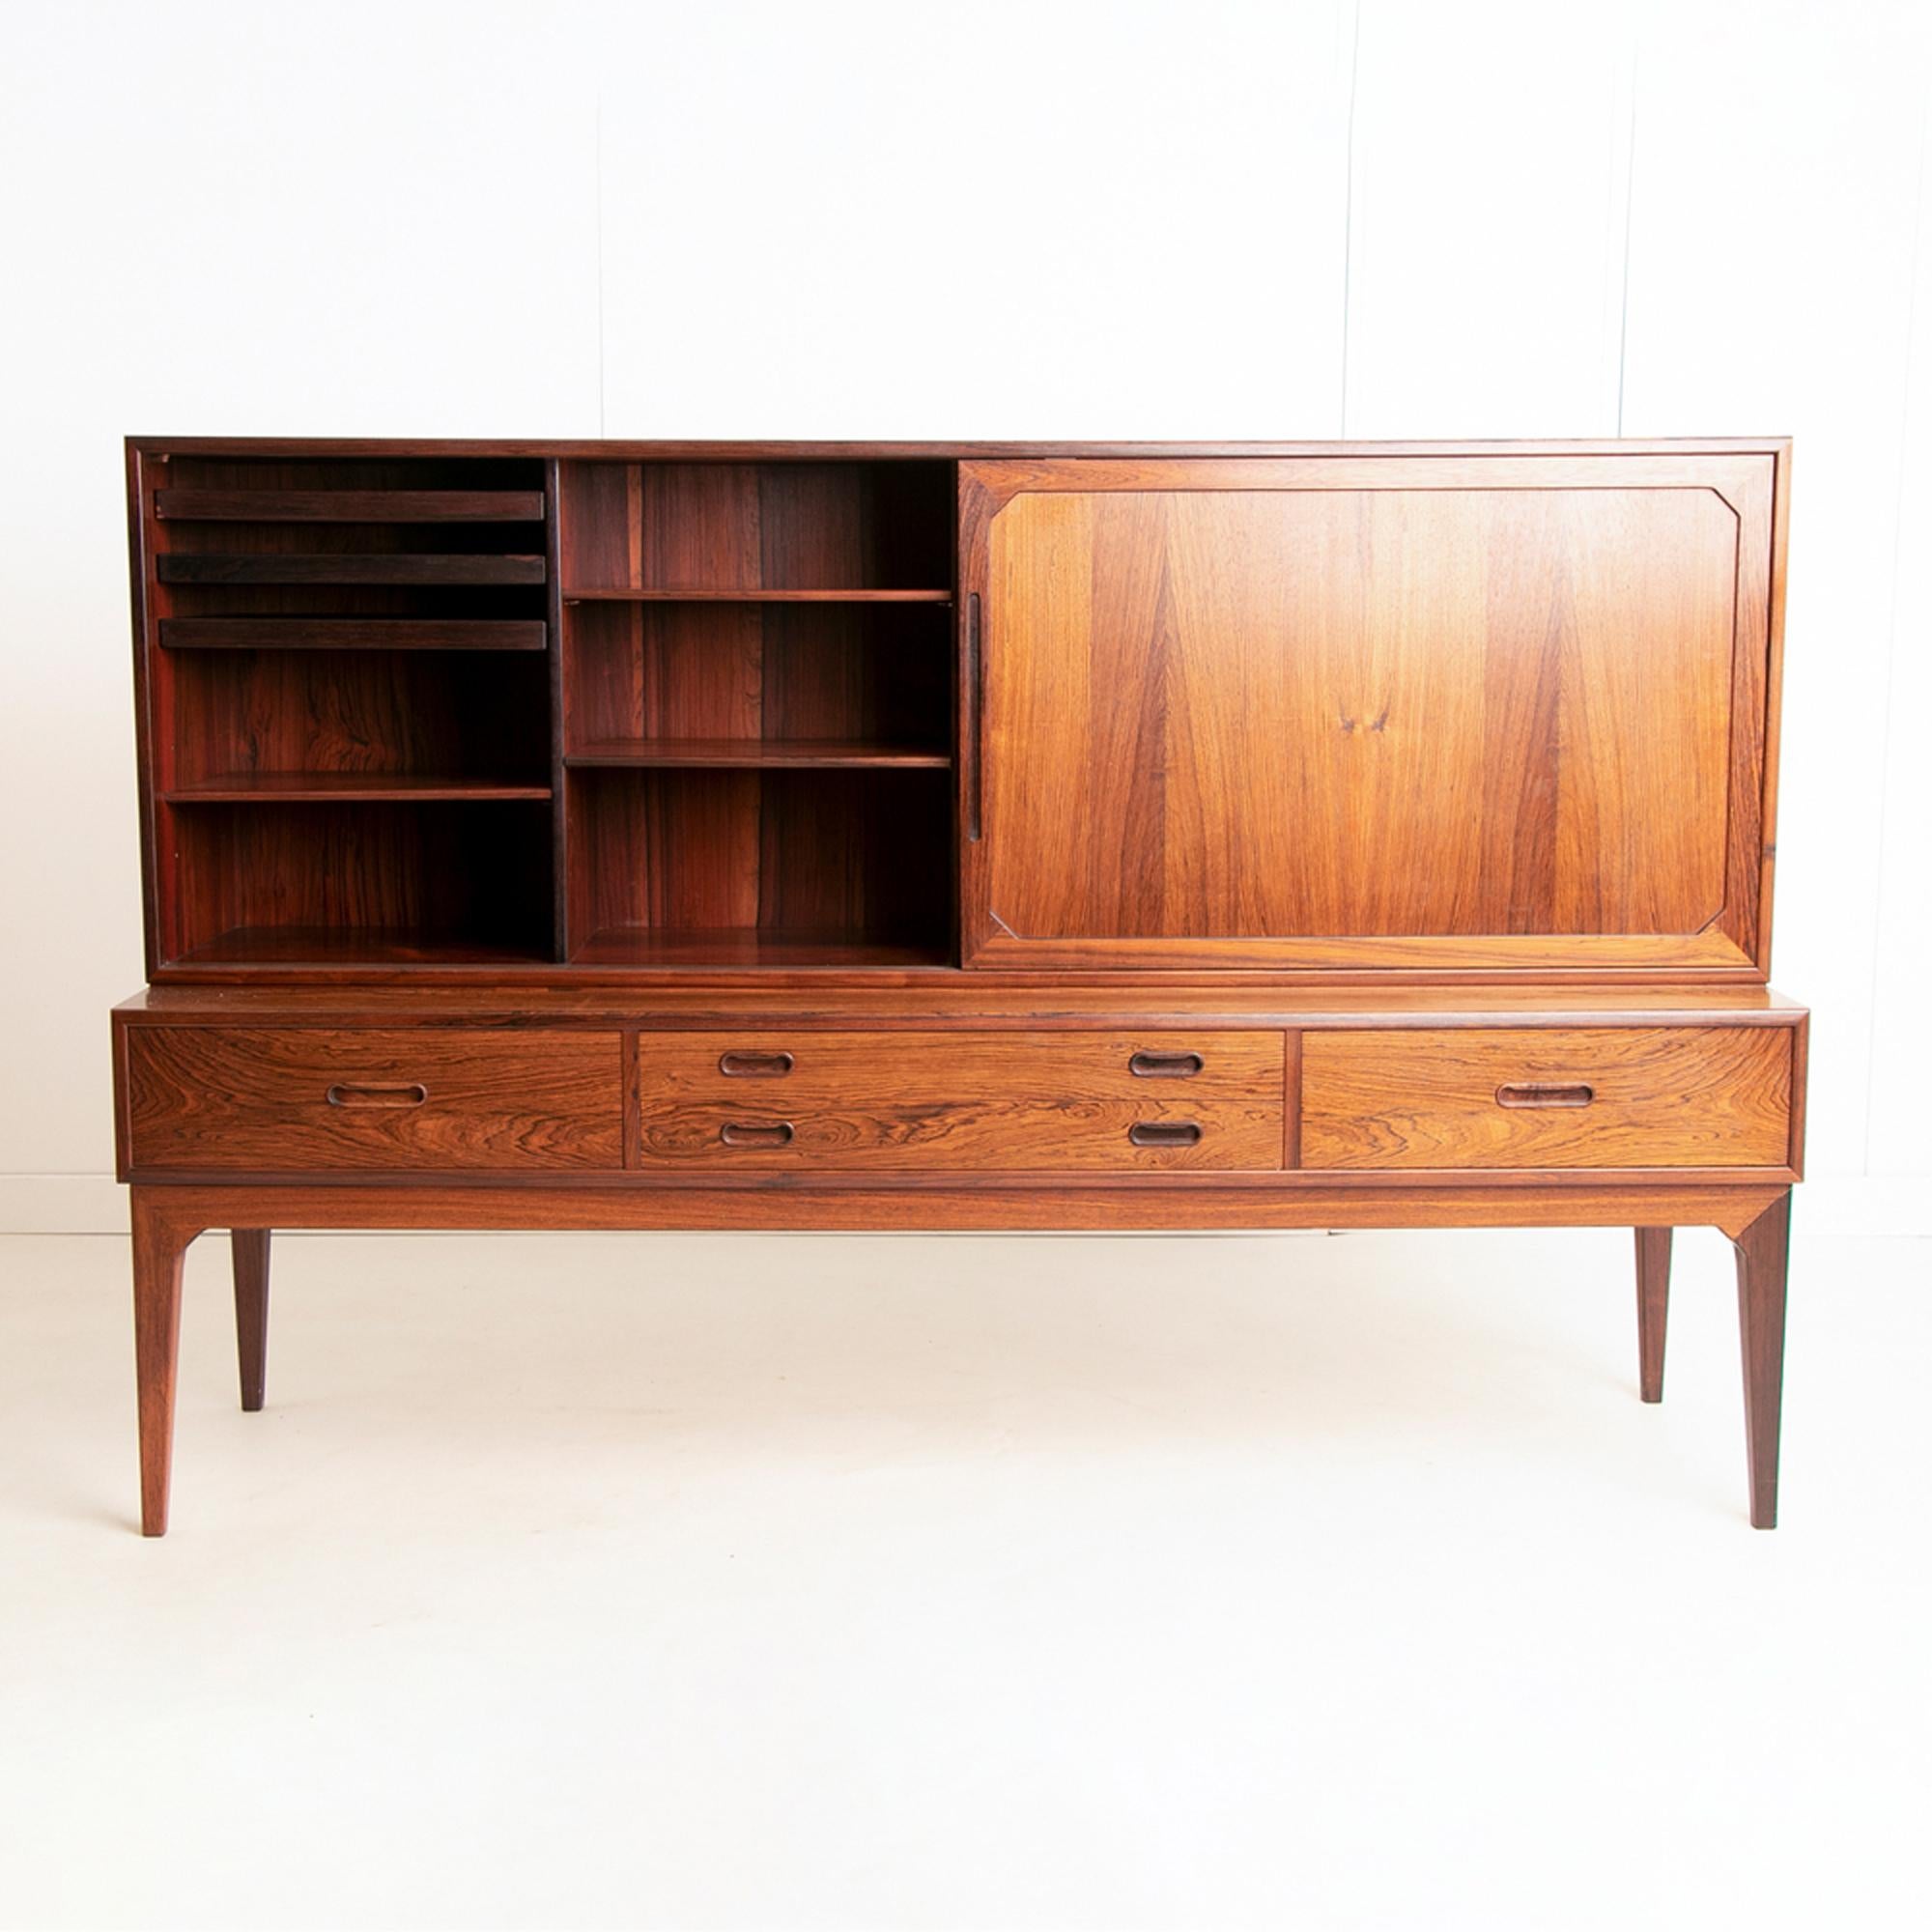 Midcentury Danish rosewood highboard by Severin Hansen for Haslev Møb.